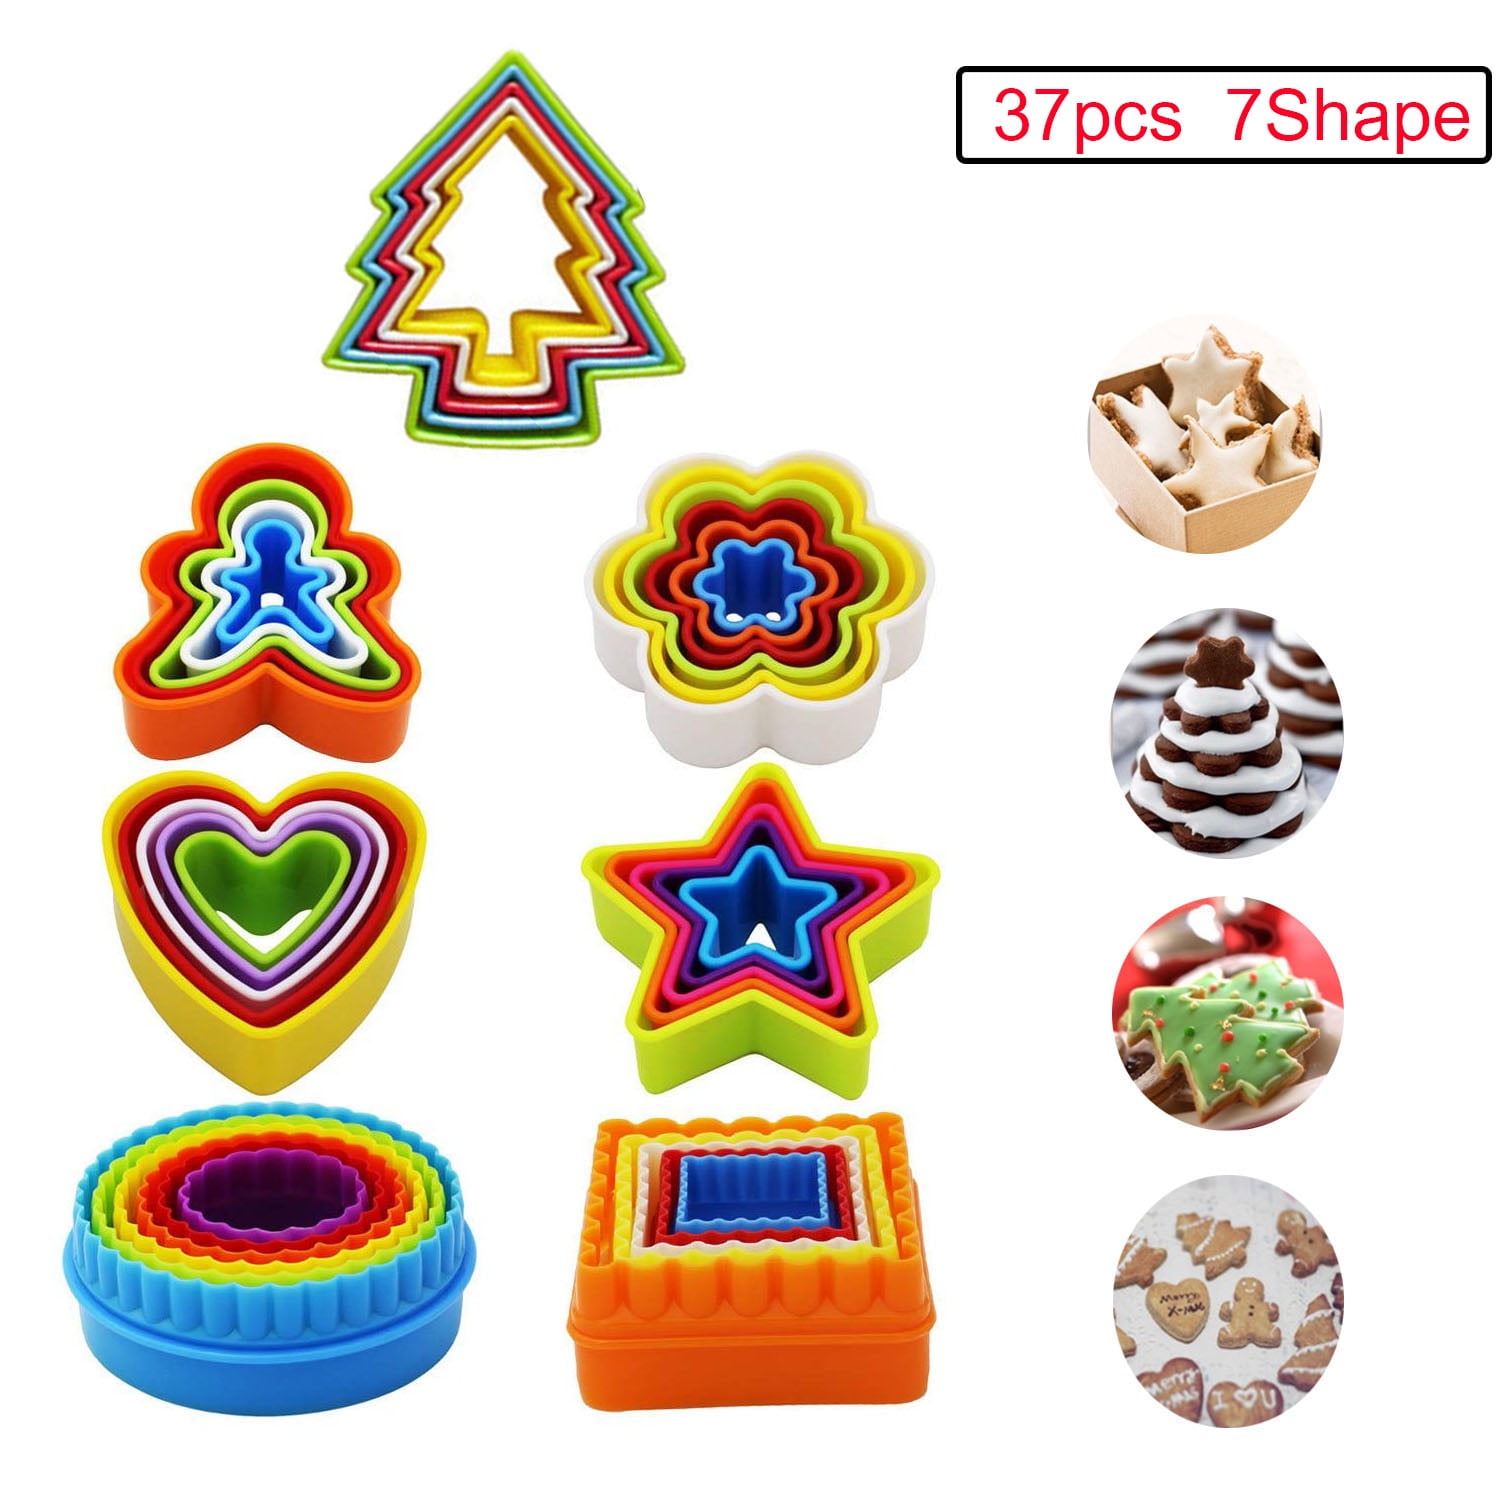 Small Size 8 Pieces Plastic Biscuit Cutters Star,Angel,Gingerbread Man,Christmas Tree,Snowman,Bell,3D Christmas Tree Christmas Cookie Cutters Set